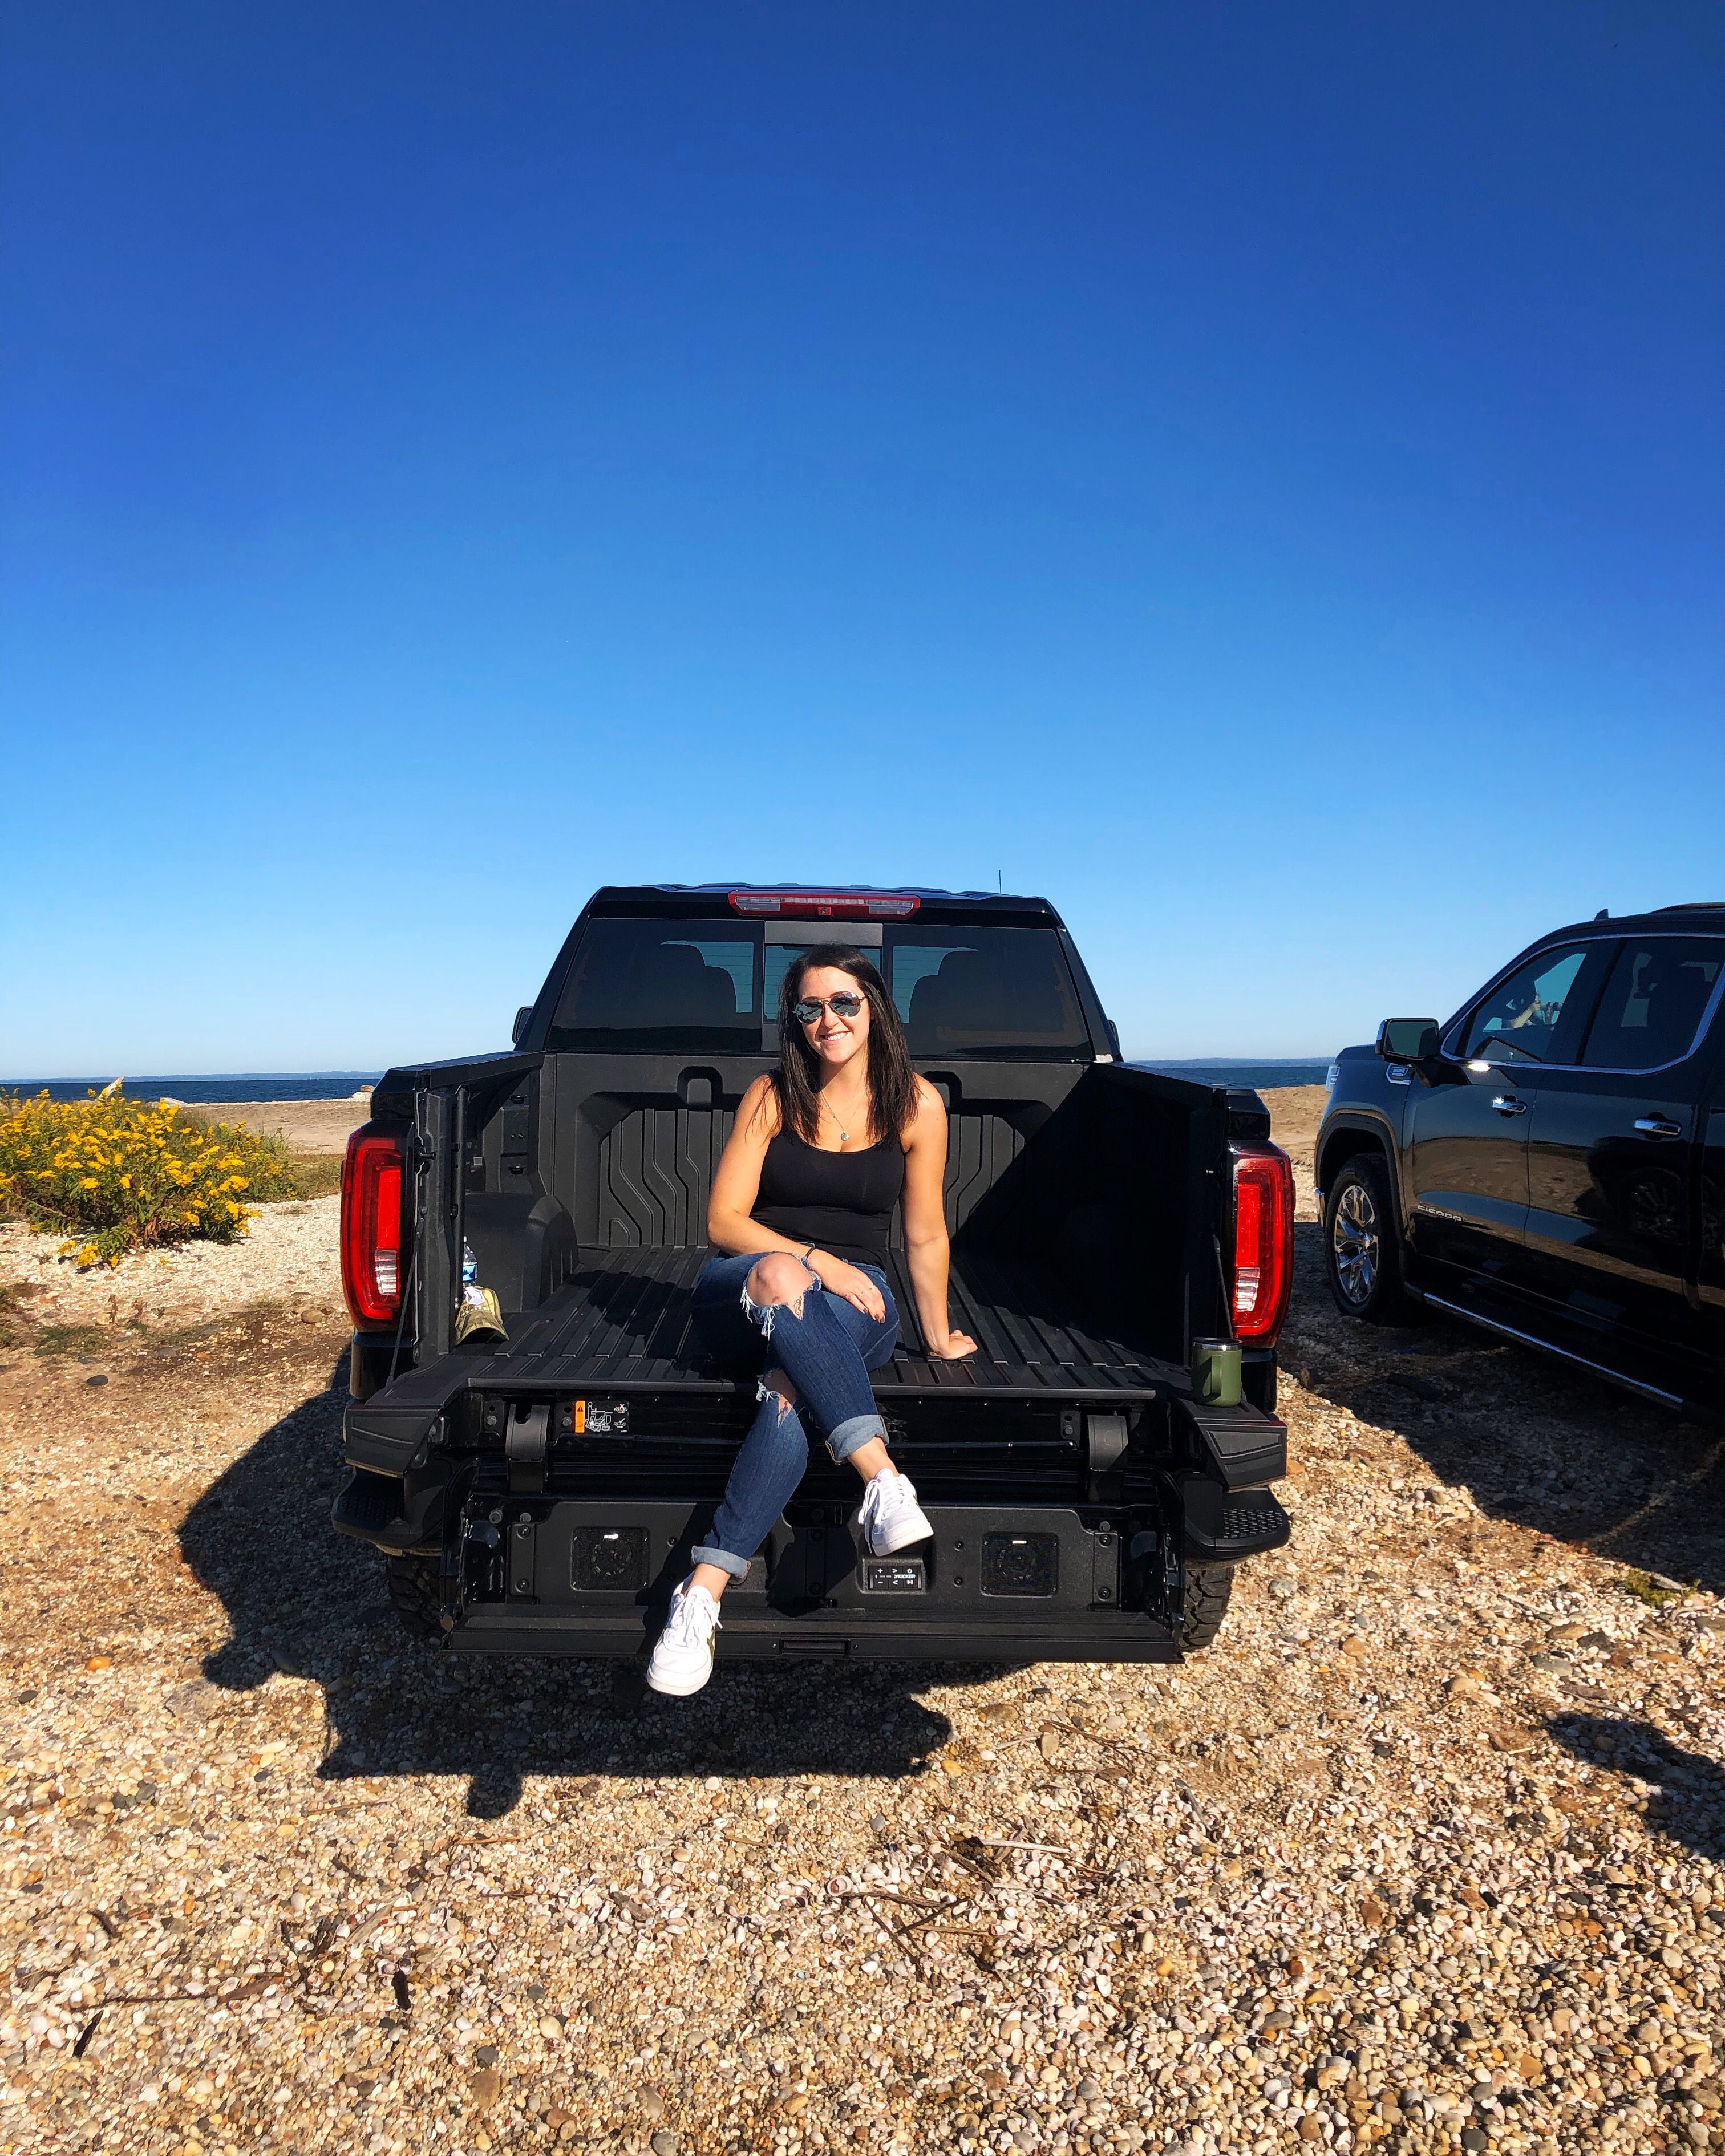 BTEâ€”Big Truck Energyâ€”Is The Confidence Boost You Didn't Know You Needed